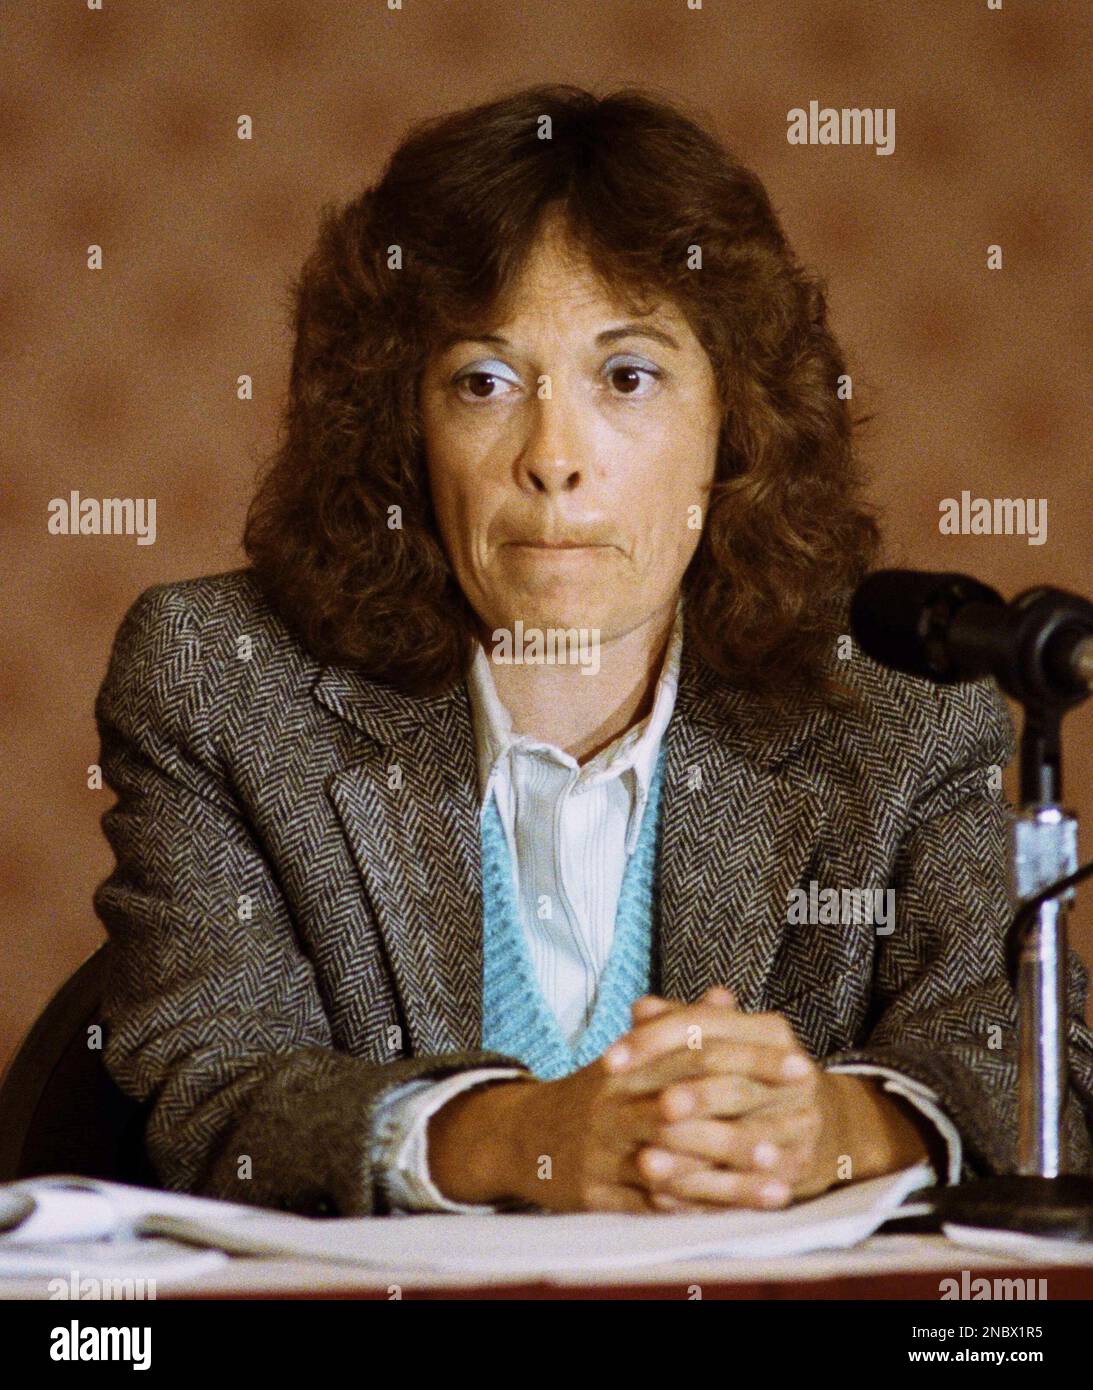 Robin Wascher bites her lower lip after describing during a NTSB in Los  Angeles on May 7, 1991, the February 1 runway collision between a USAir  jetliner and a commuter plane at